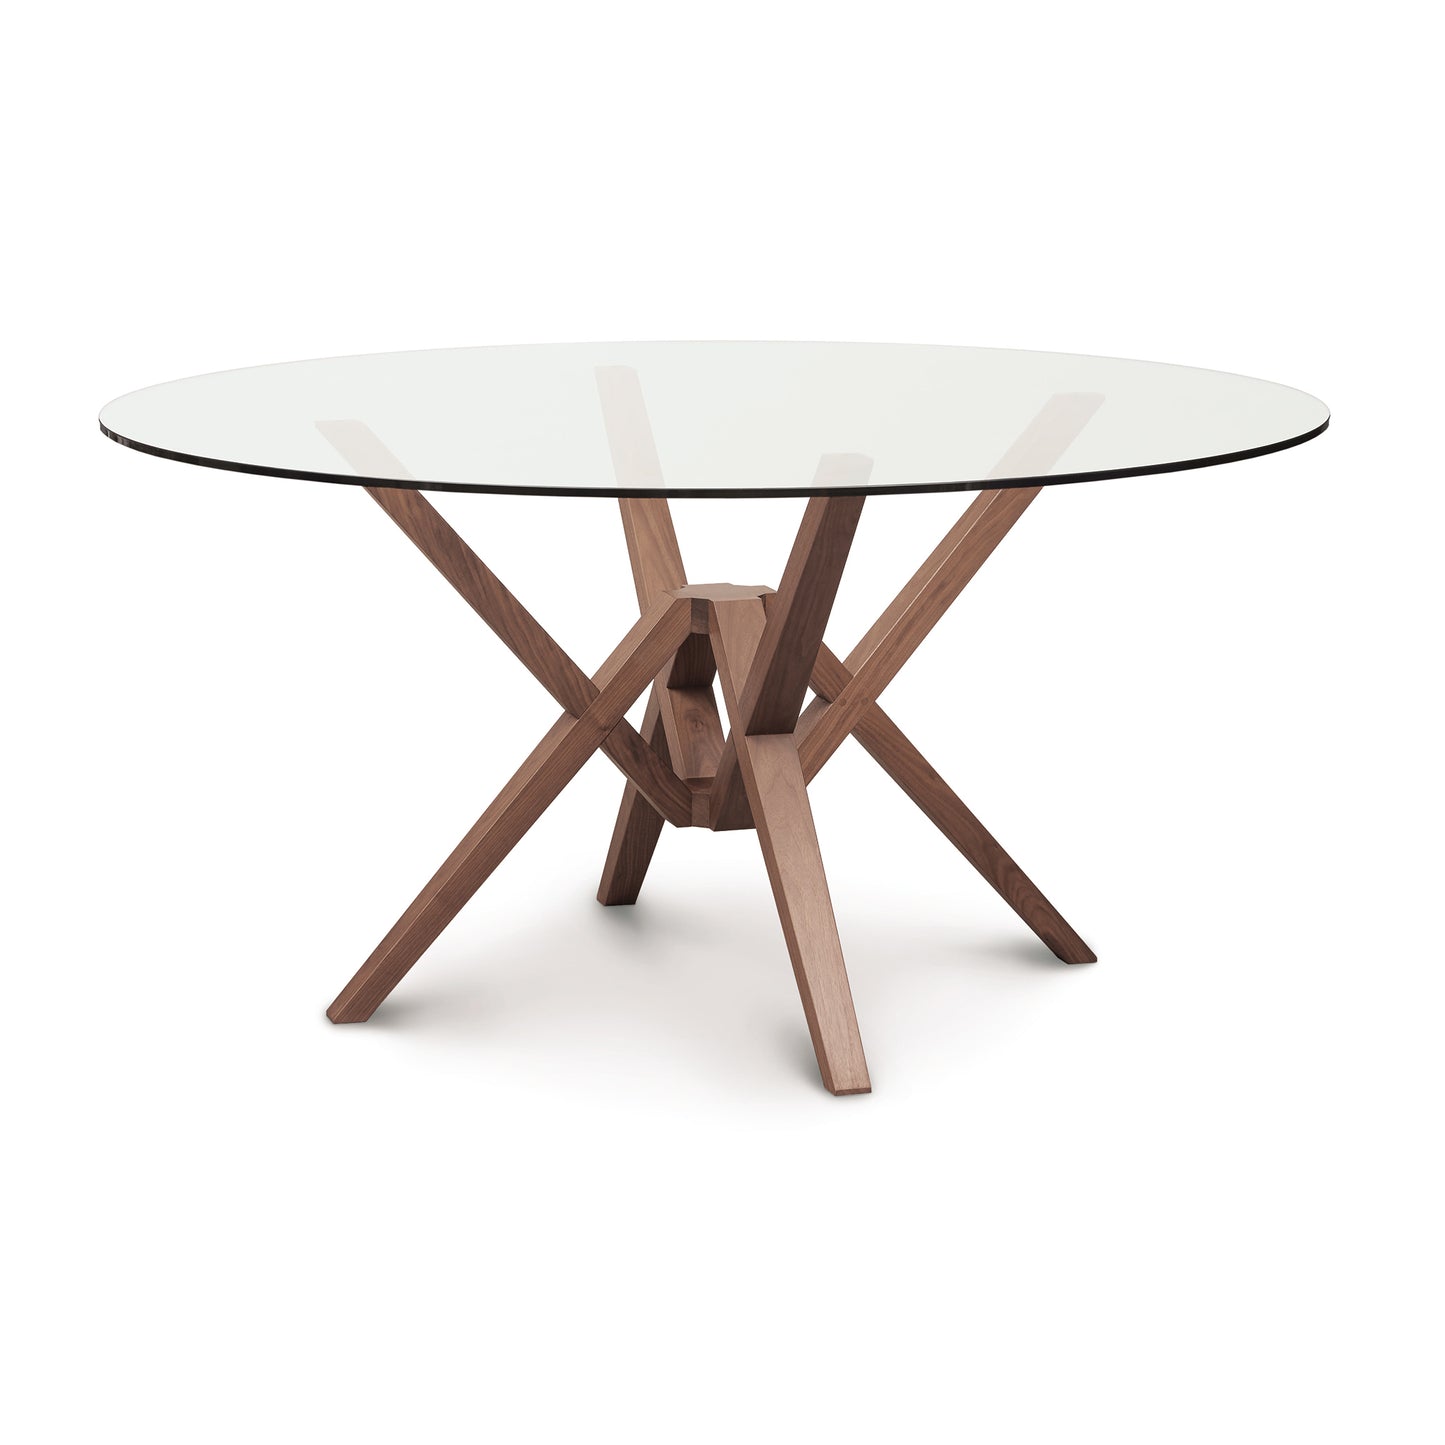 A modern Copeland Furniture Exeter Round Glass Top Table with a solid wood cross base design on a white background.